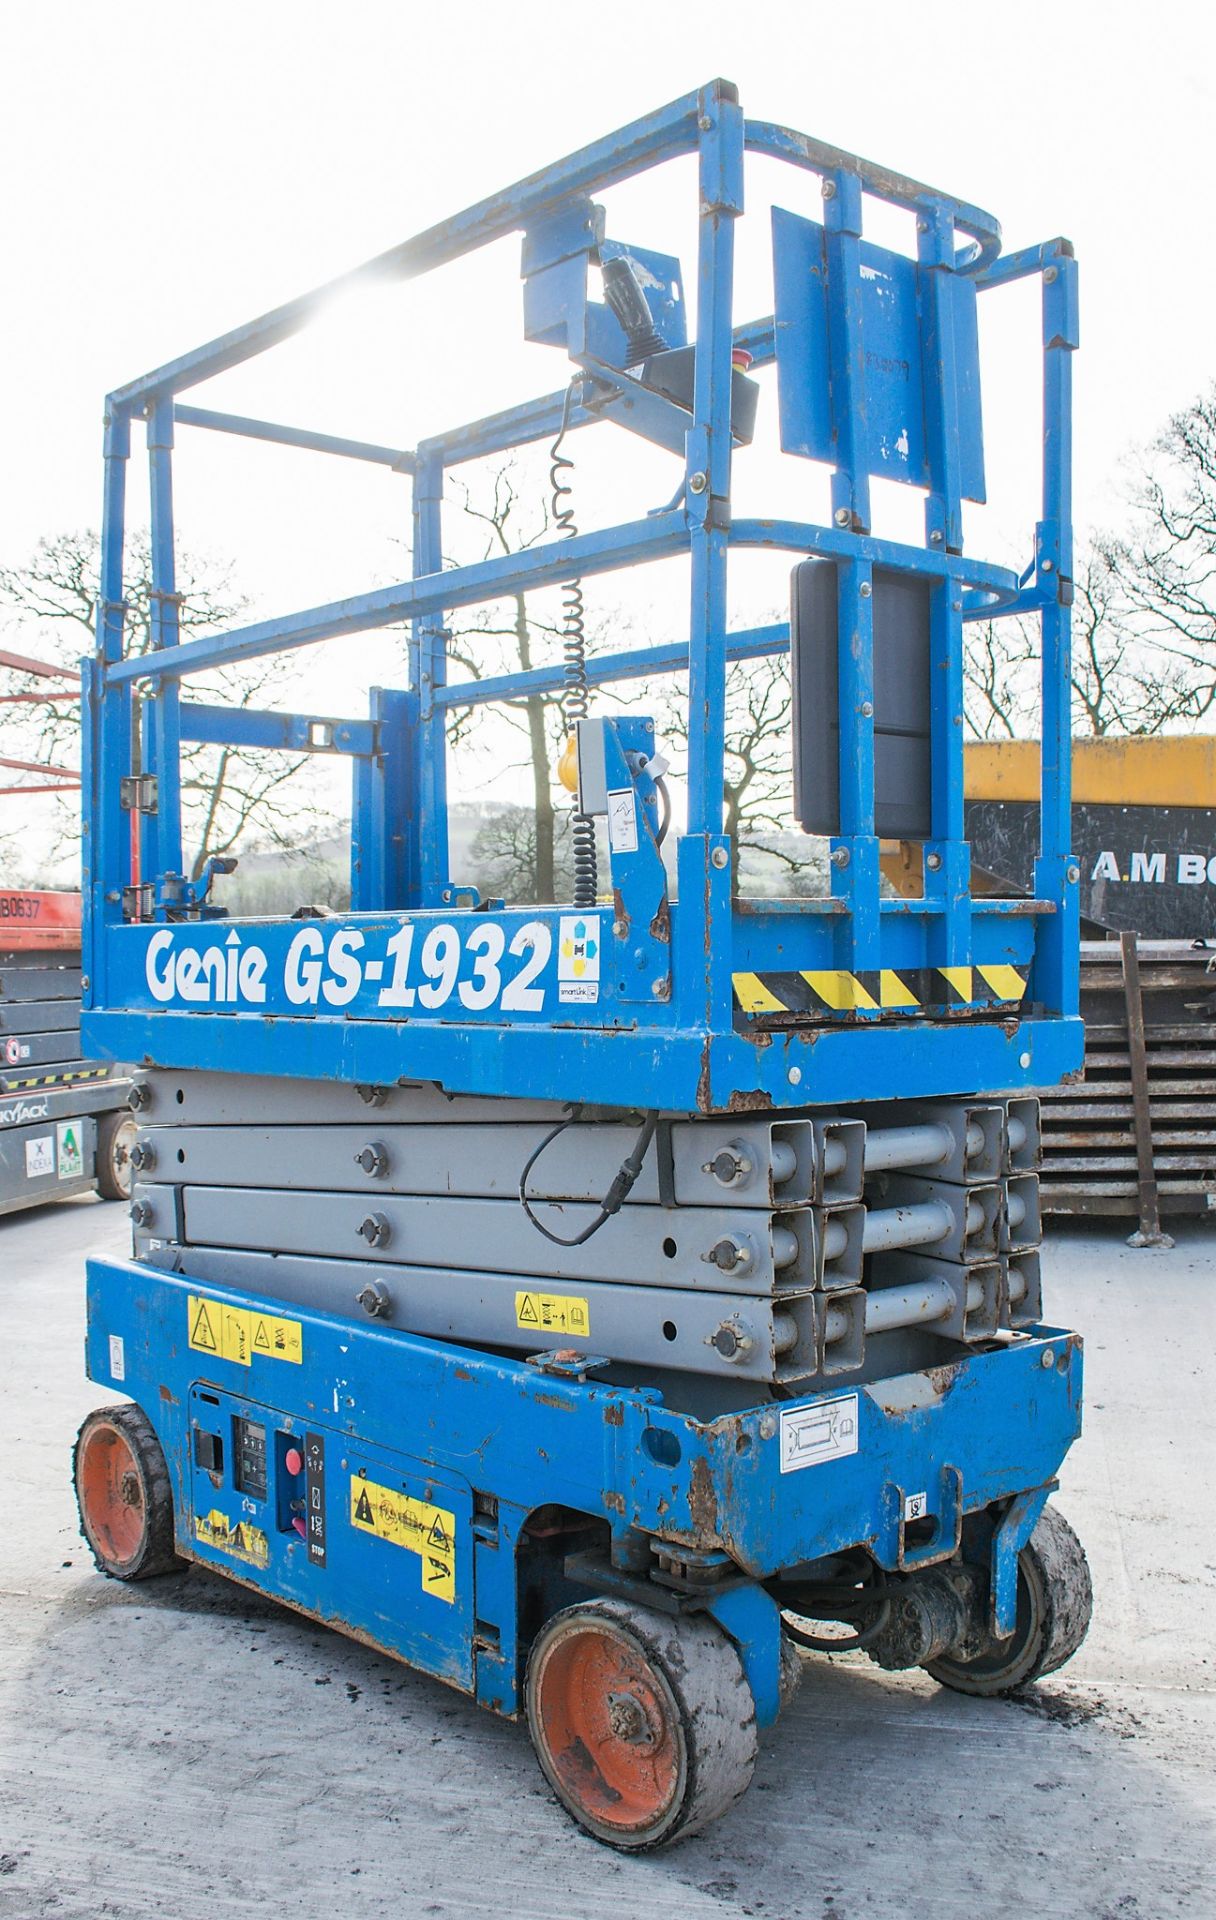 Genie GS 1932 battery electric scissor lift access platform Year: 2015 S/N: 19508 Recorded Hours: - Image 4 of 8